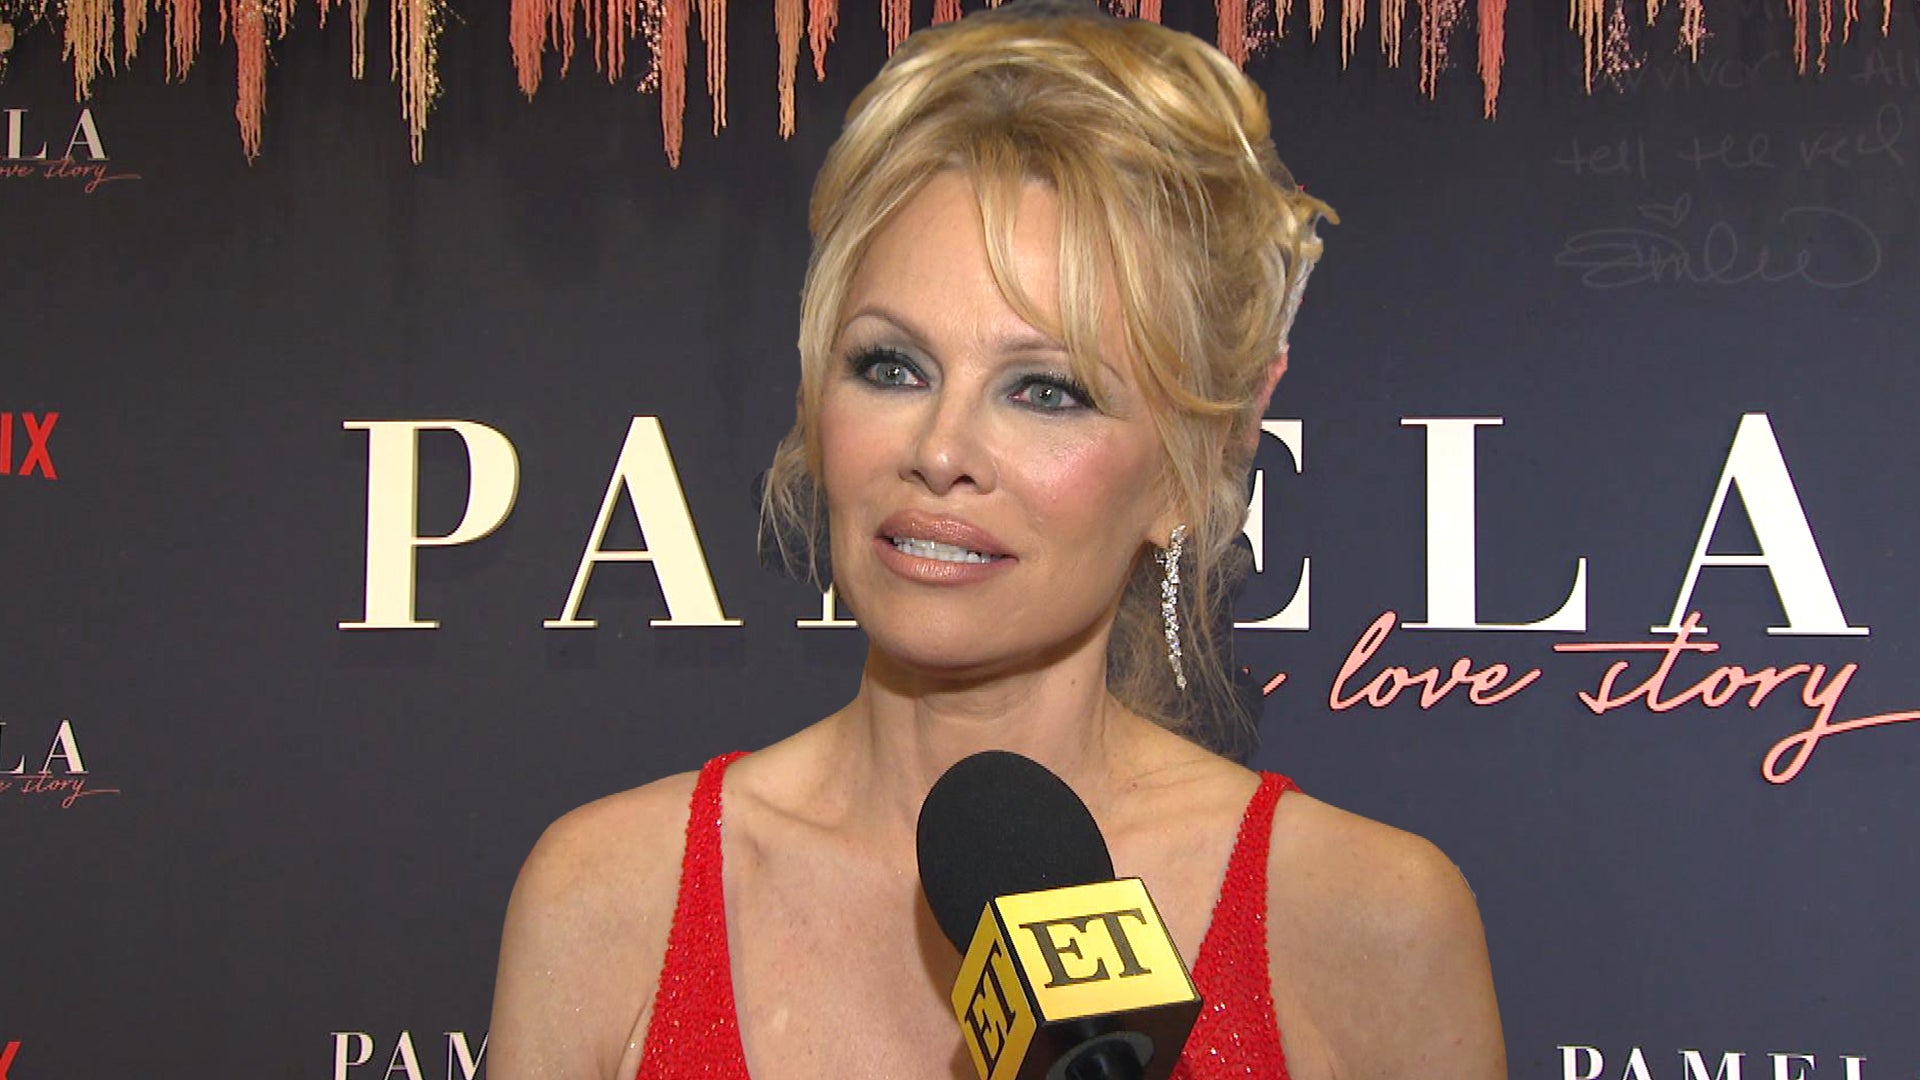 Pamela Anderson Says the Pam and Tommy Series Gives Her Nightmares Entertainment Tonight photo photo picture